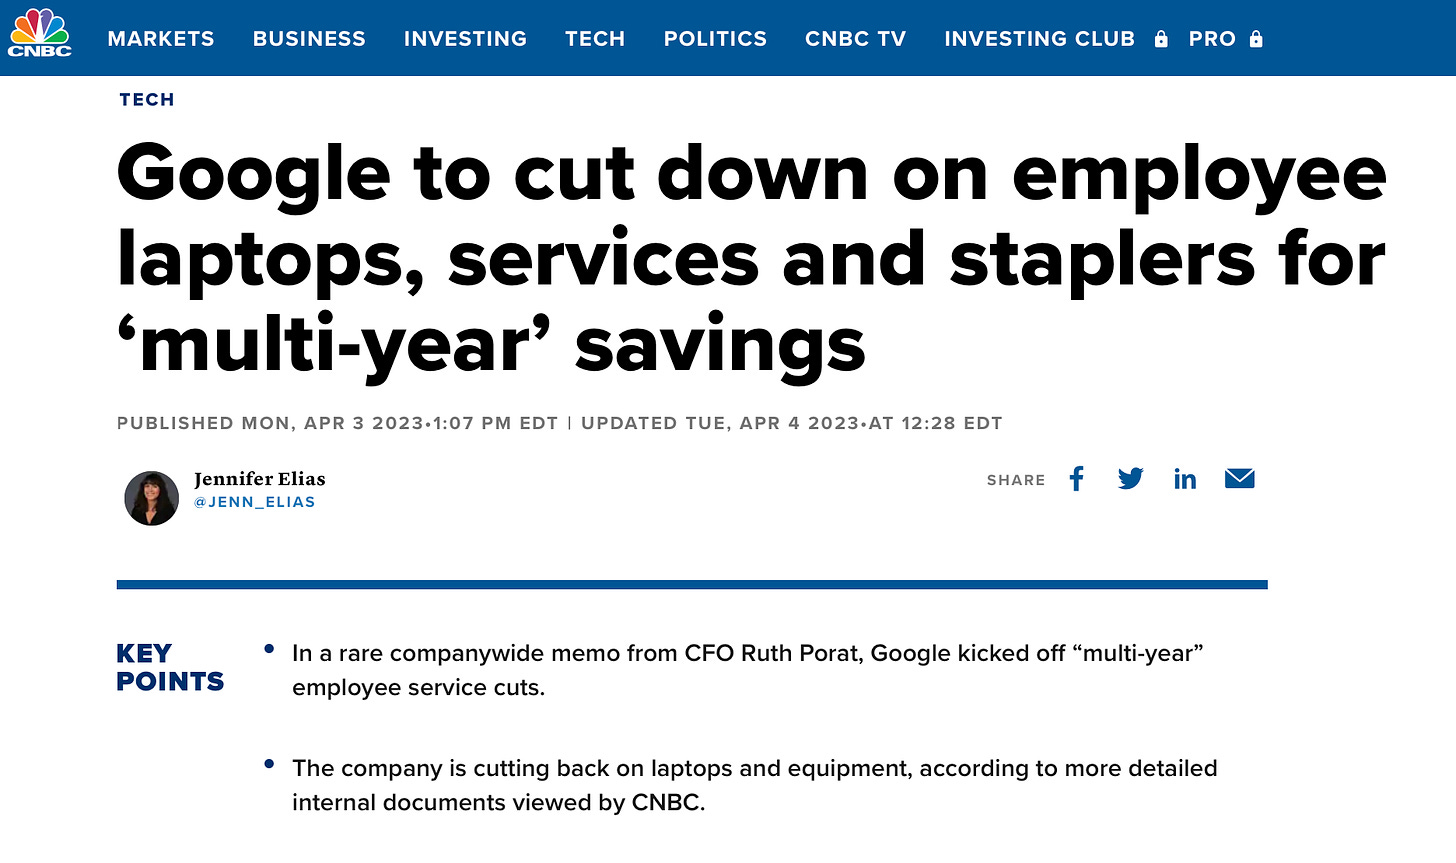 Google to cut down on employee laptops, services and staplers for ‘multi-year’ savings PUBLISHED MON, APR 3 20231:07 PM EDTUPDATED TUE, APR 4 2023AT 12:28 EDT thumbnail Jennifer Elias @JENN_ELIAS SHARE Share Article via Facebook Share Article via Twitter Share Article via LinkedIn Share Article via Email KEY POINTS In a rare companywide memo from CFO Ruth Porat, Google kicked off “multi-year” employee service cuts. The company is cutting back on laptops and equipment, according to more detailed internal documents viewed by CNBC.